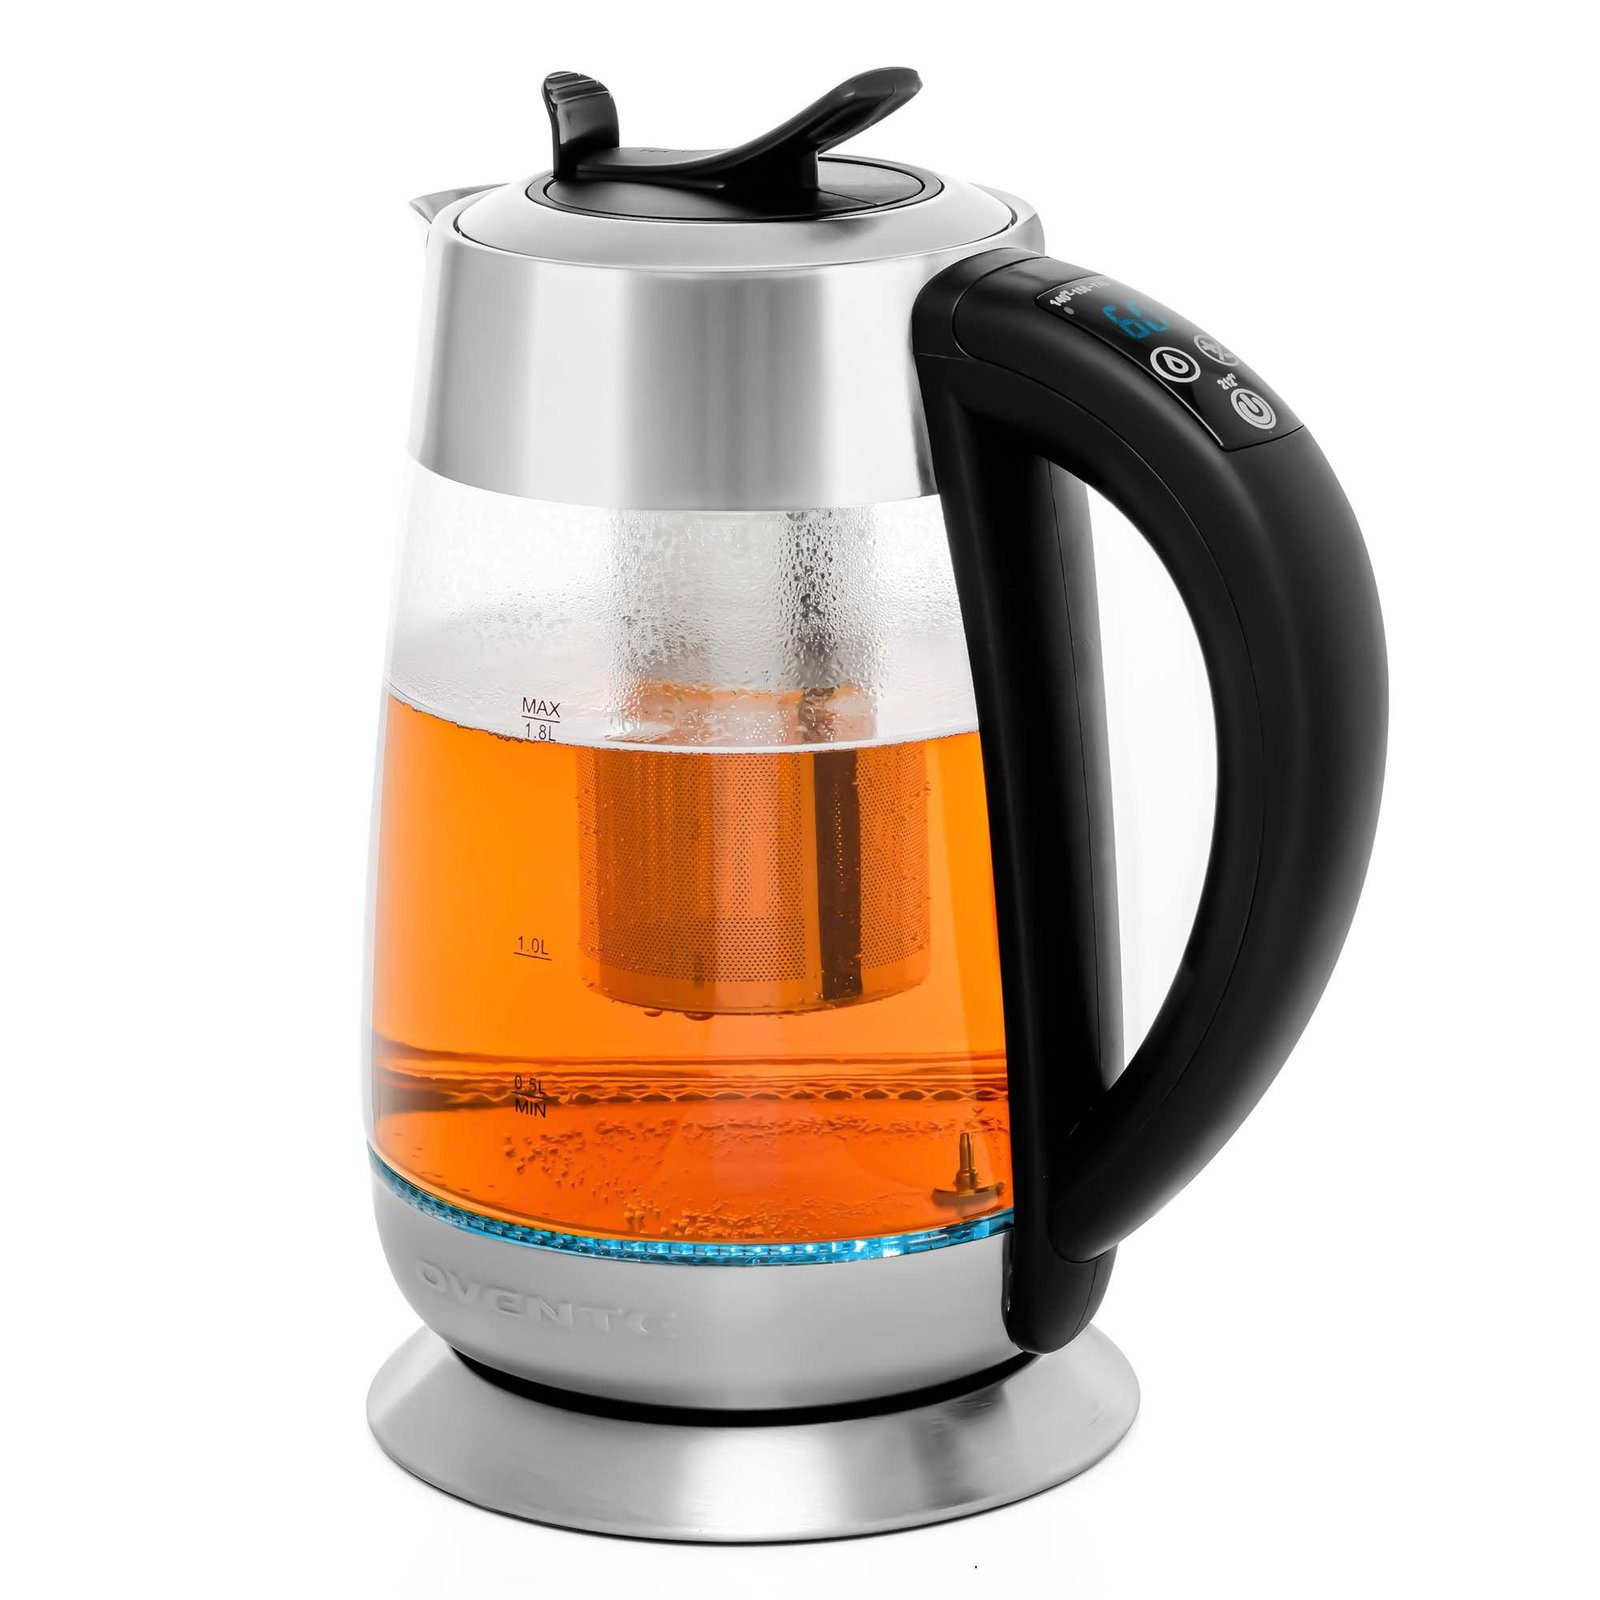 Ovente Glass Electric Tea Kettle 1.8 Liter BPA Free Cordless Body, 1500W  Instant Hot Water Boiler Heater with Stainless Steel Infuser and Automatic  Shut Off for Coffee, Tea, Chocolate, Silver KG661S –